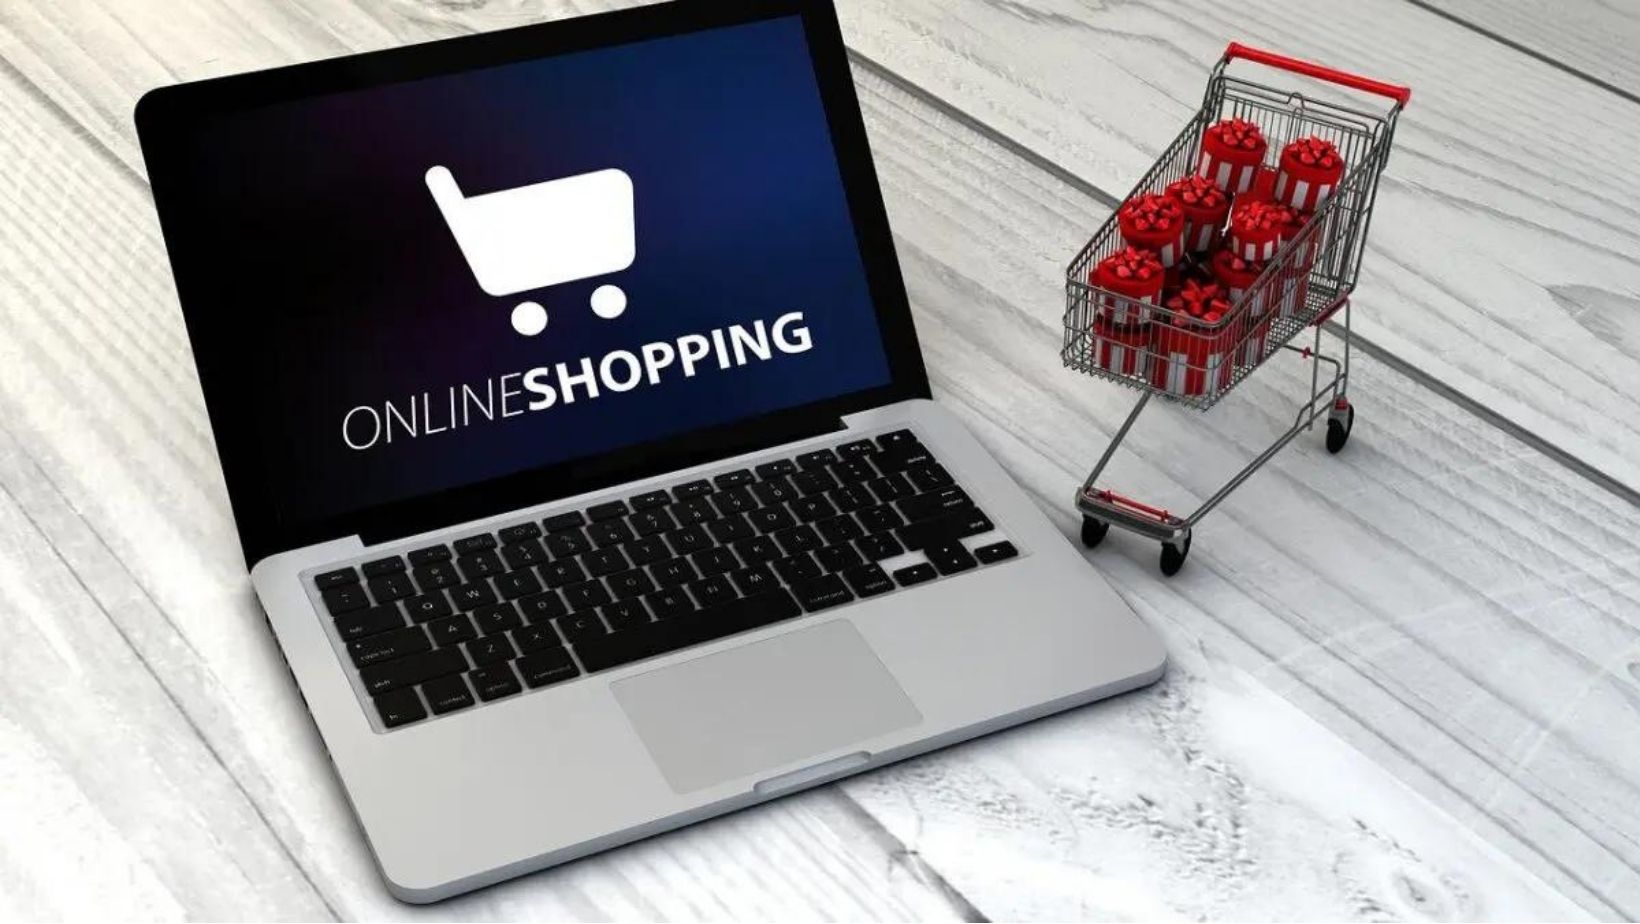 Why Online Shopping is so Good During Pandemic